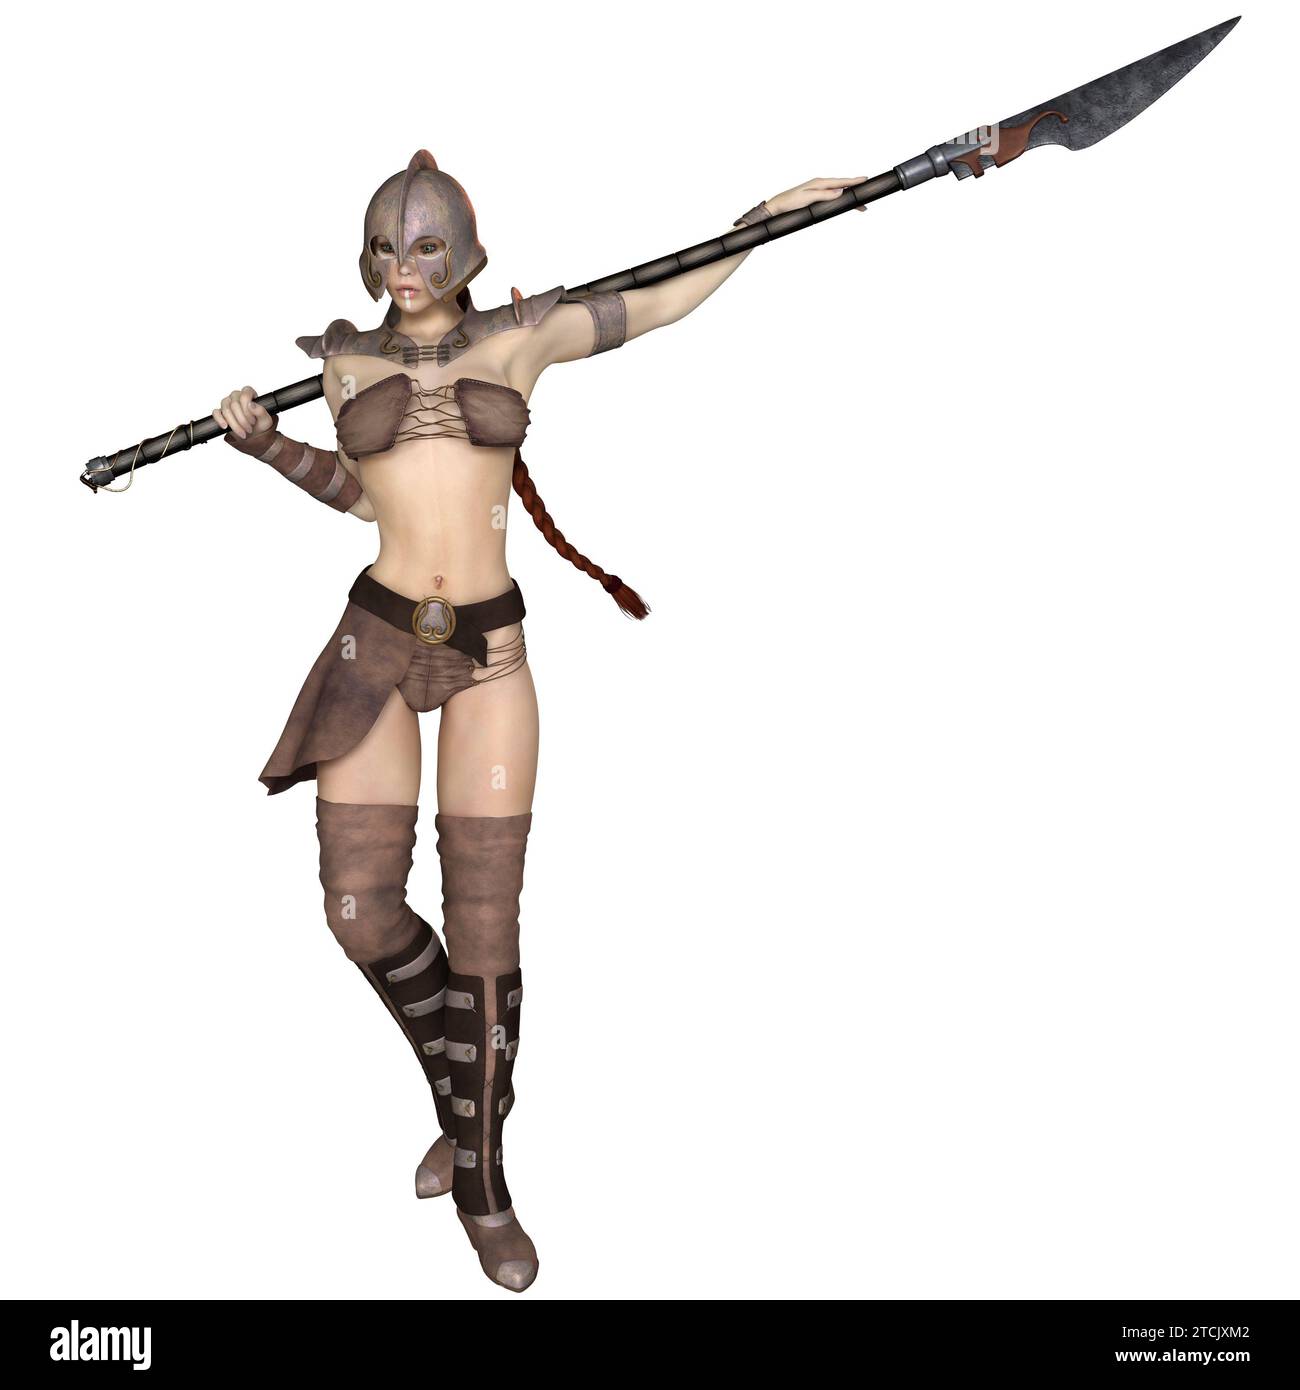 Female Fantasy Barbarian Hunter Standing with Spear Stock Photo